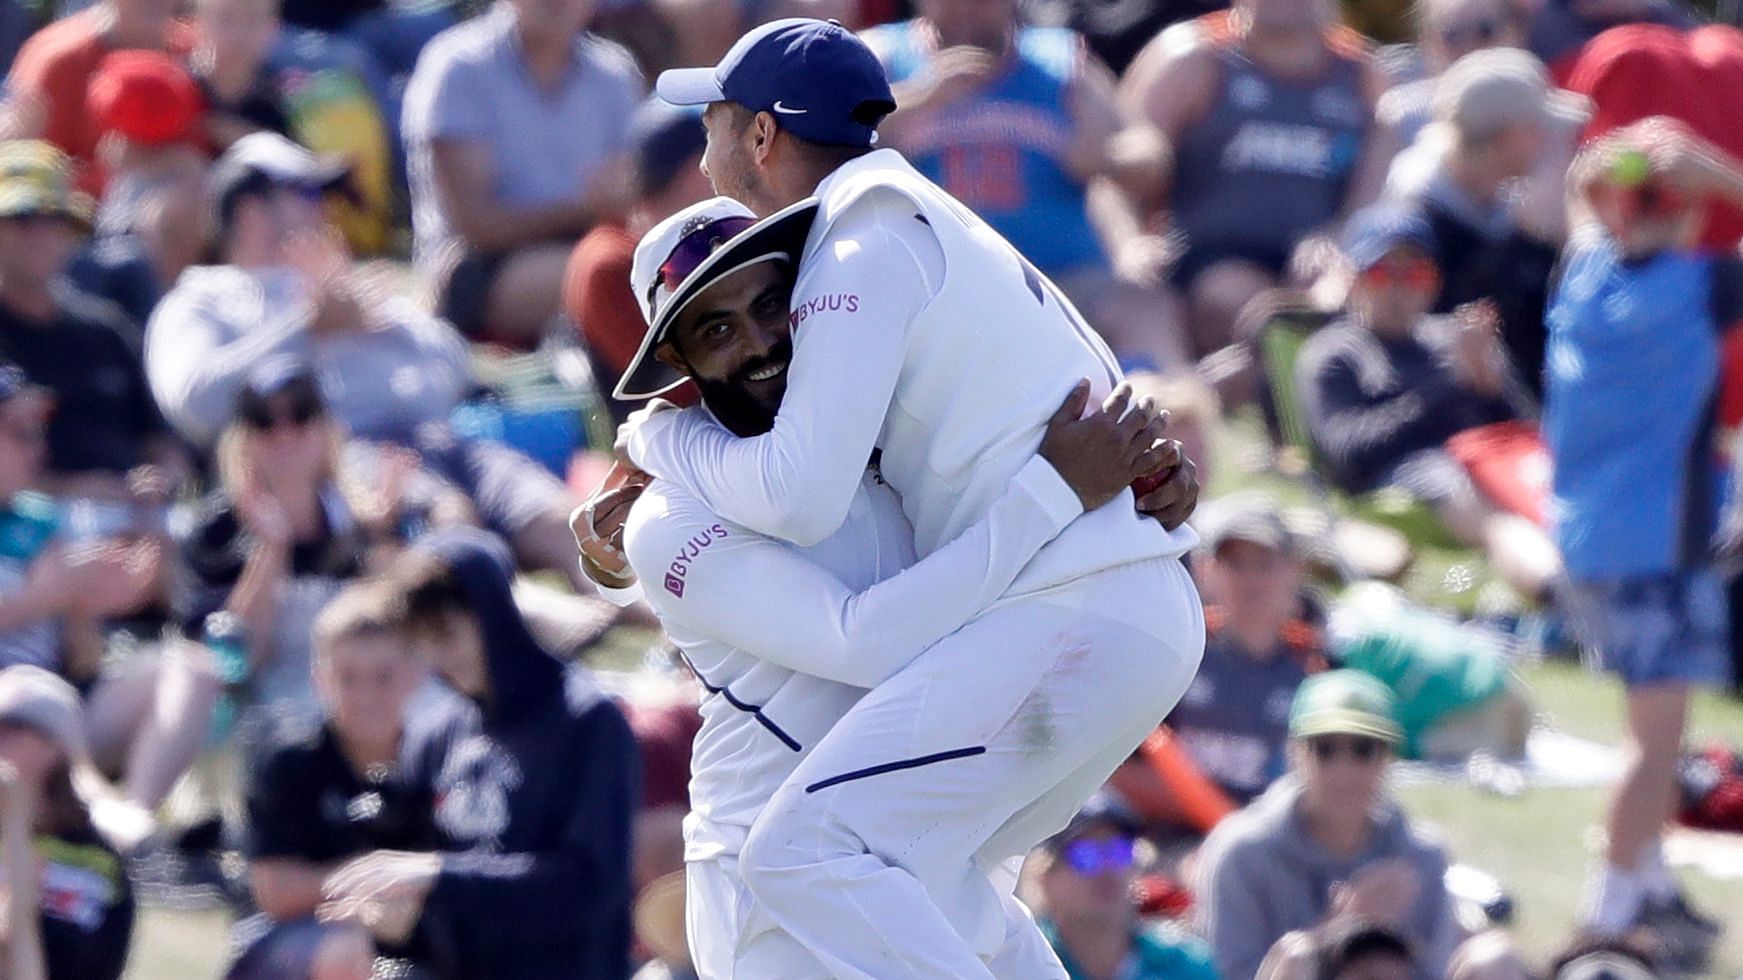 Ravindra Jadeja celebrates after taking Neil Wagner’s catch at the boundary on Day 2 of the second Test in Christchurch.